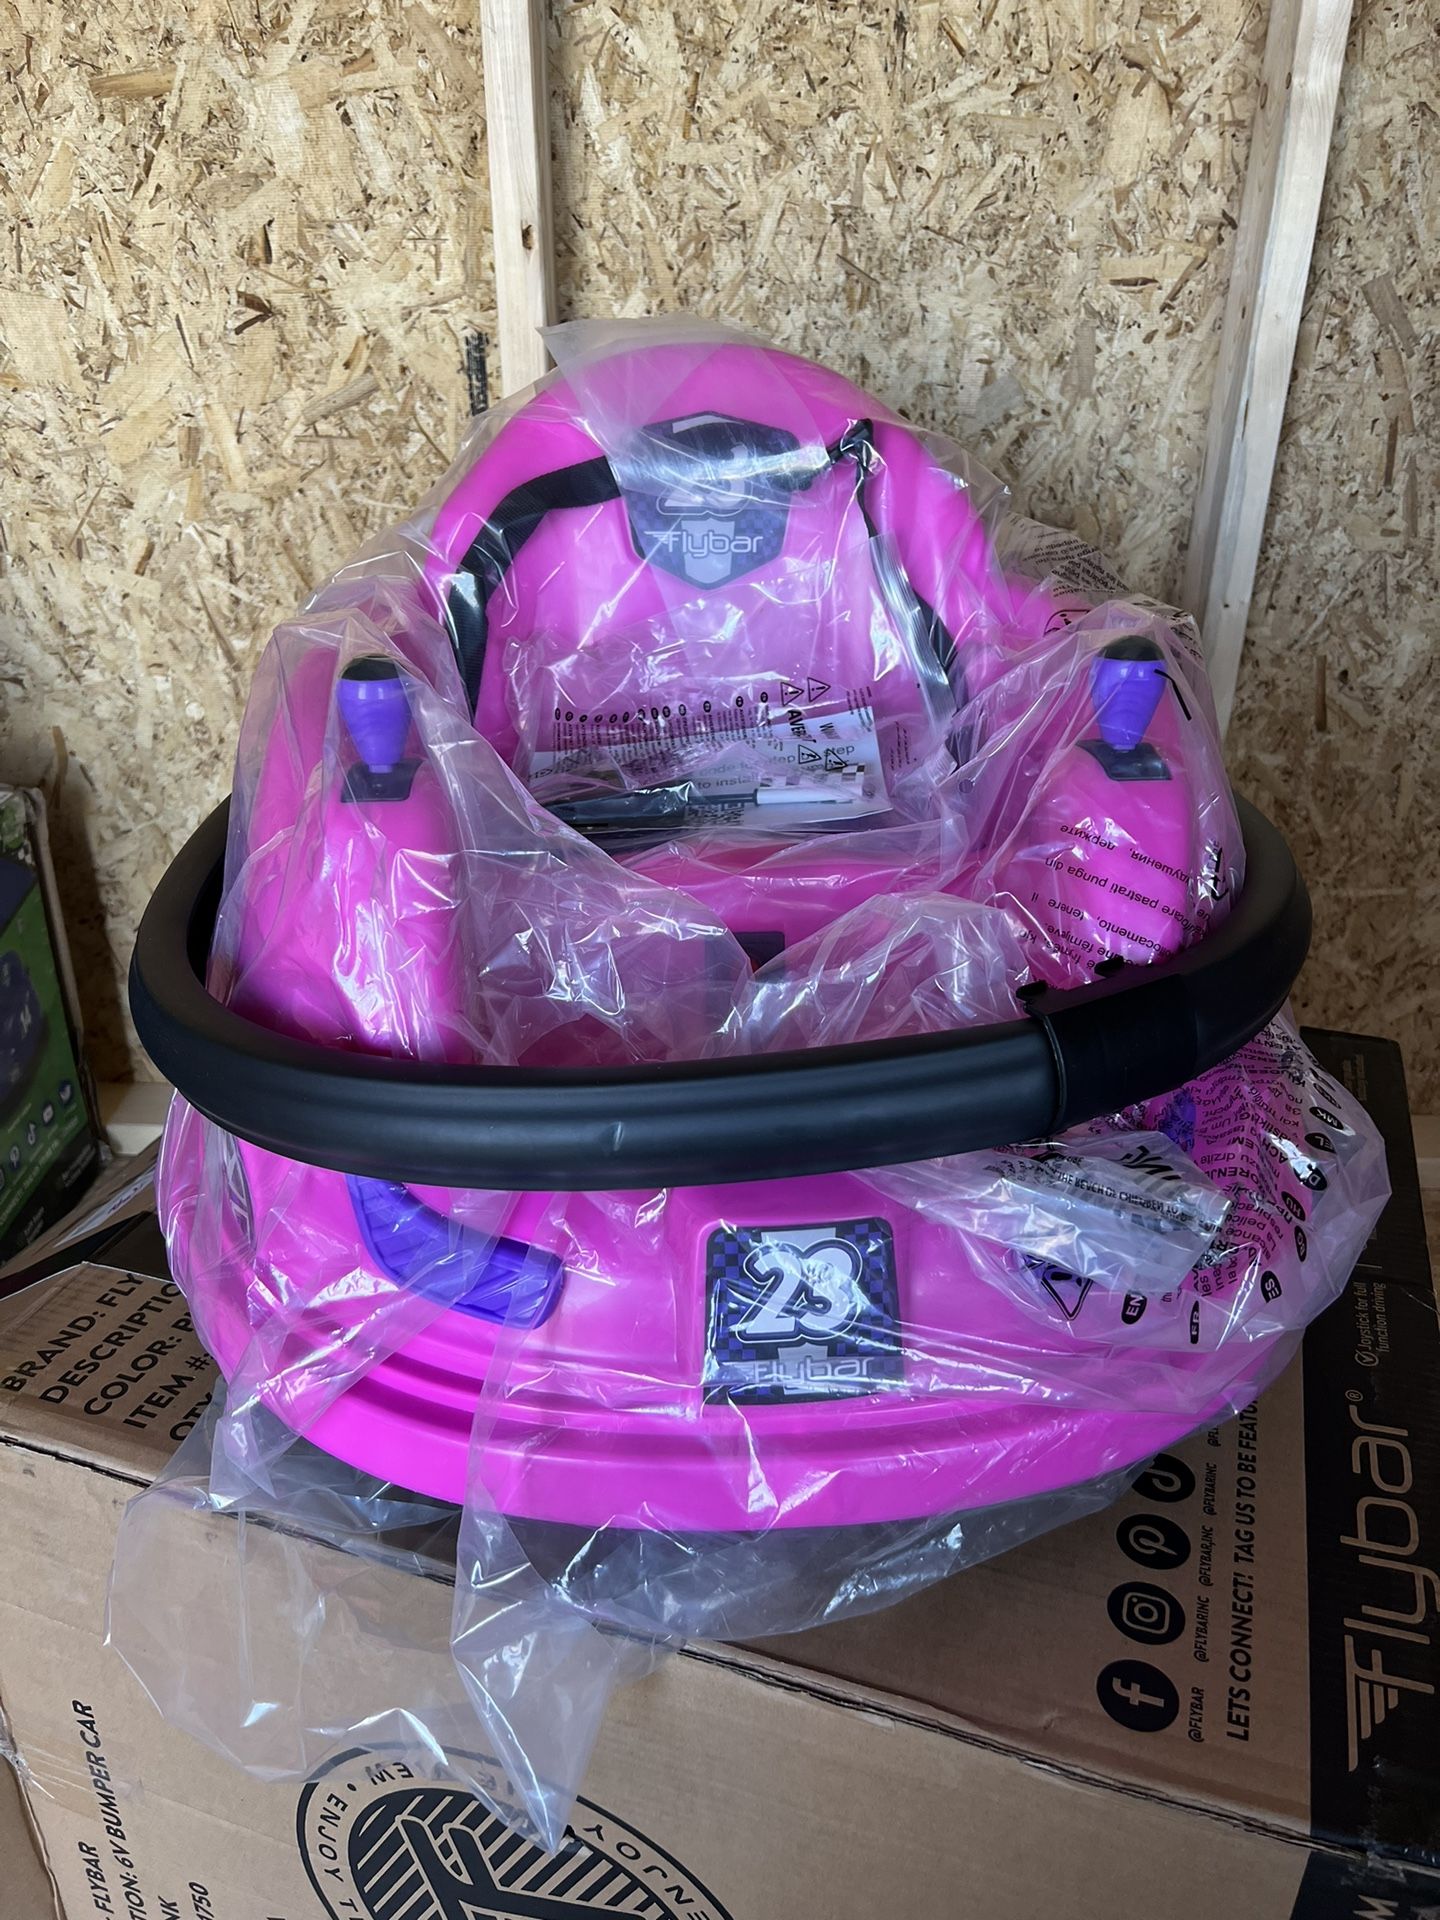 Flybar 6V Bumper Car, Battery Powered Ride-On, Fun LED Lights, Includes Charger, Pink